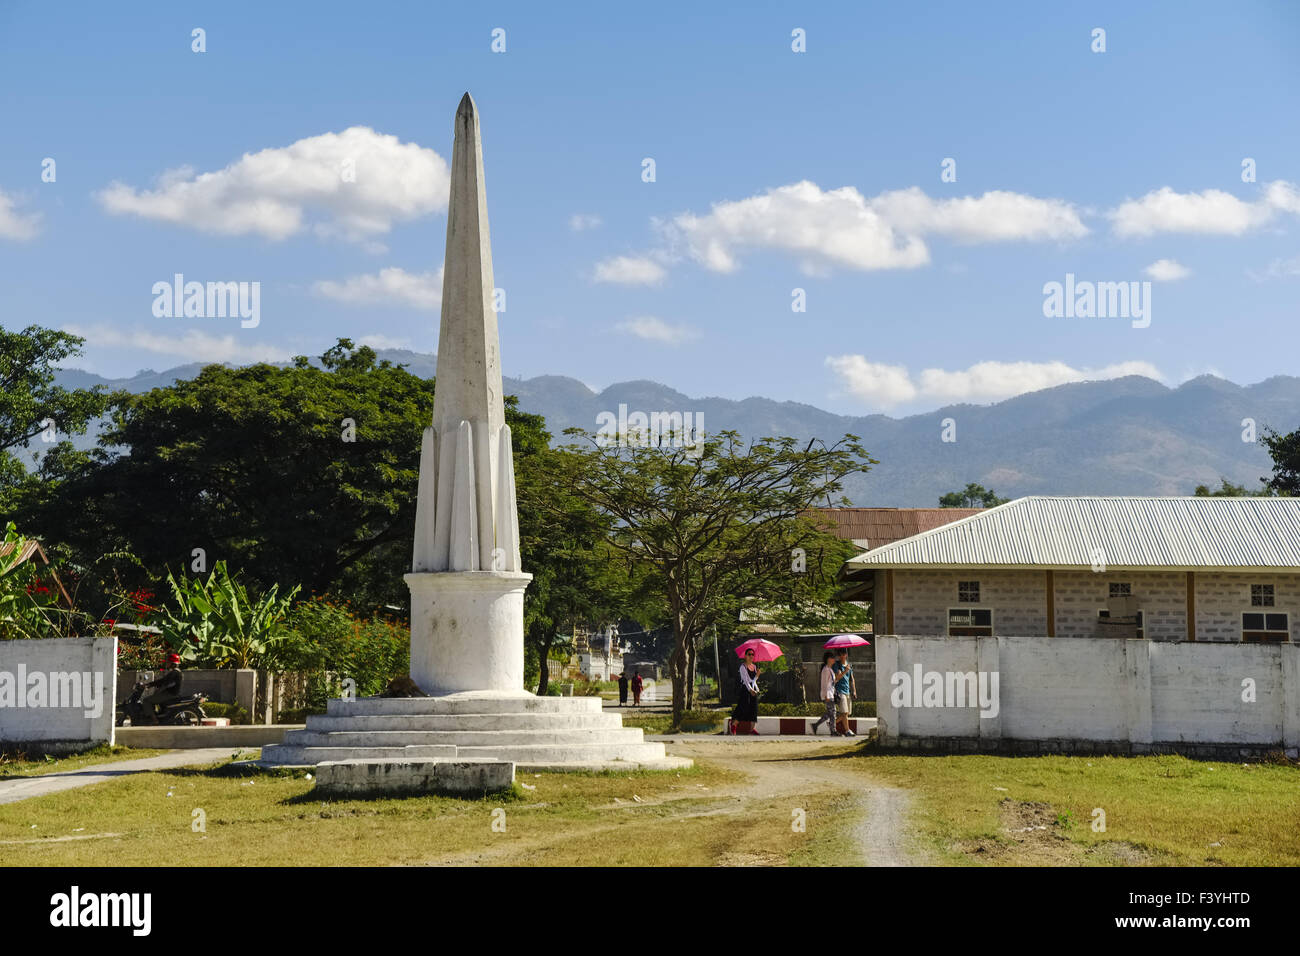 Independence Monument in Nyaung Shwe, Myanmar Stock Photo